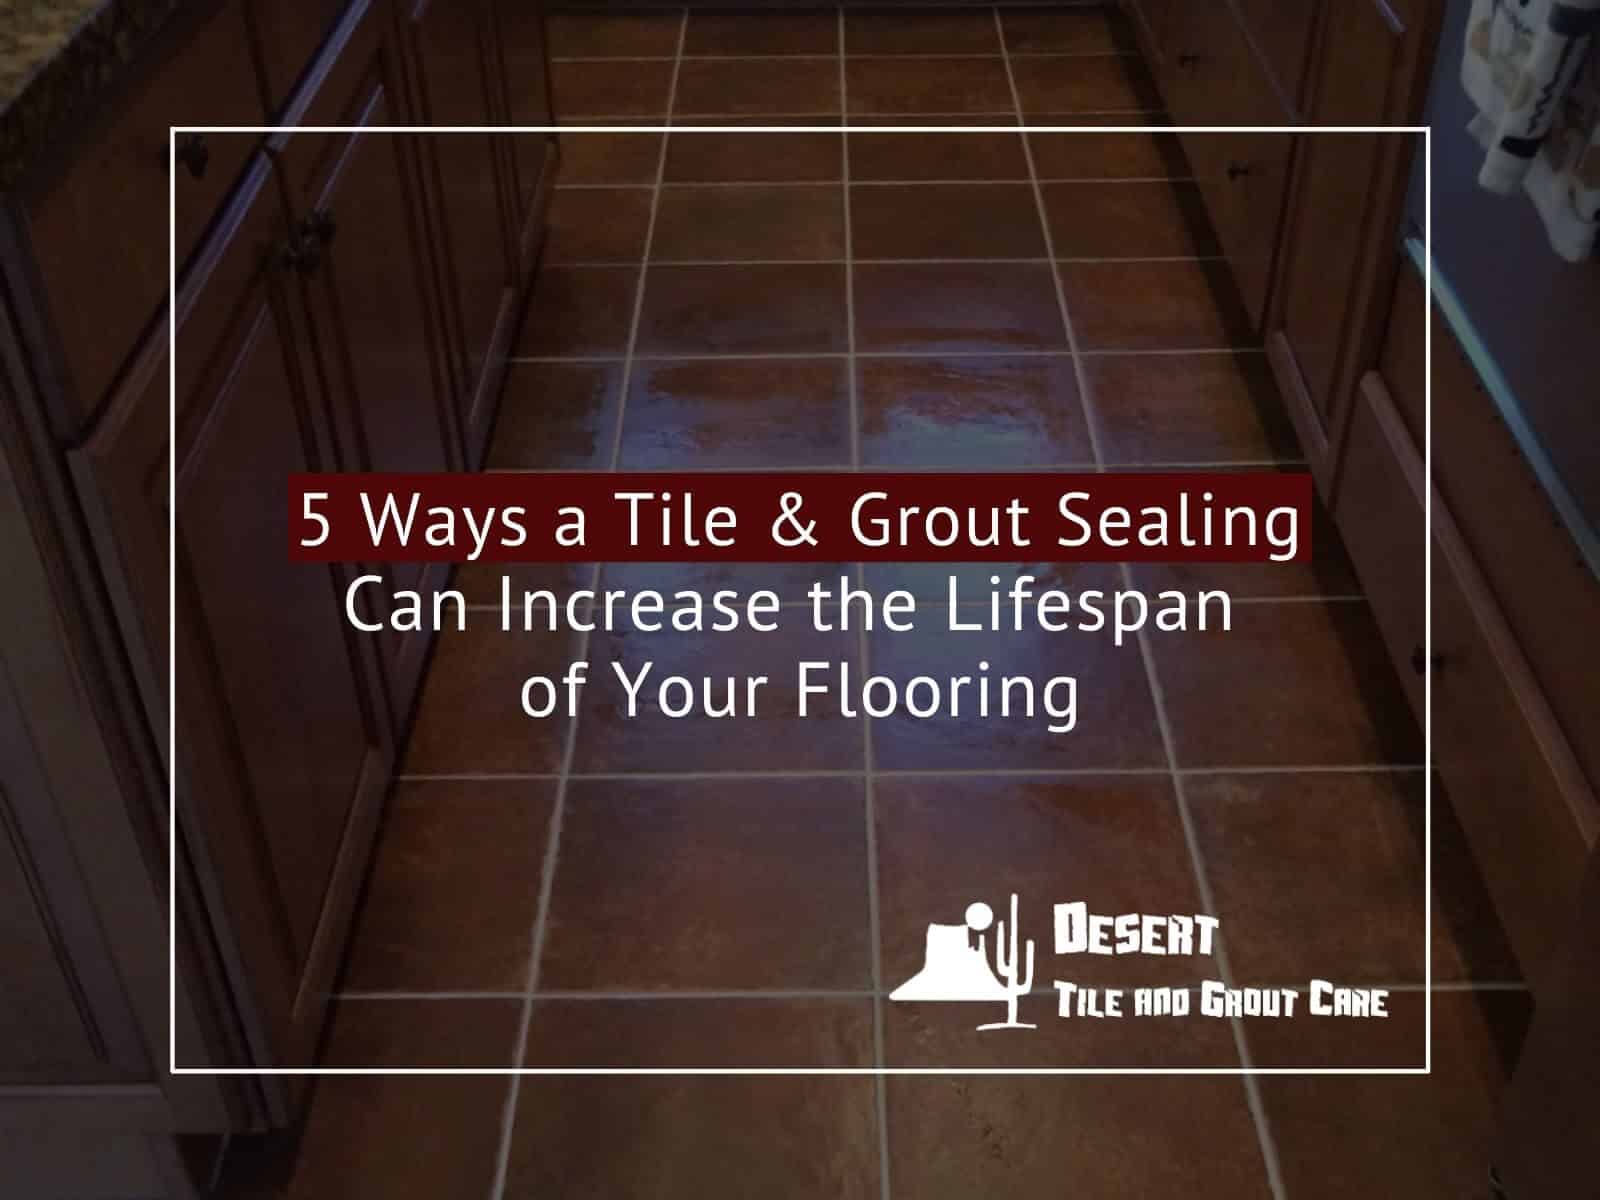 5 Ways a Tile & Grout Sealing Can Increase the Lifespan of Your Flooring